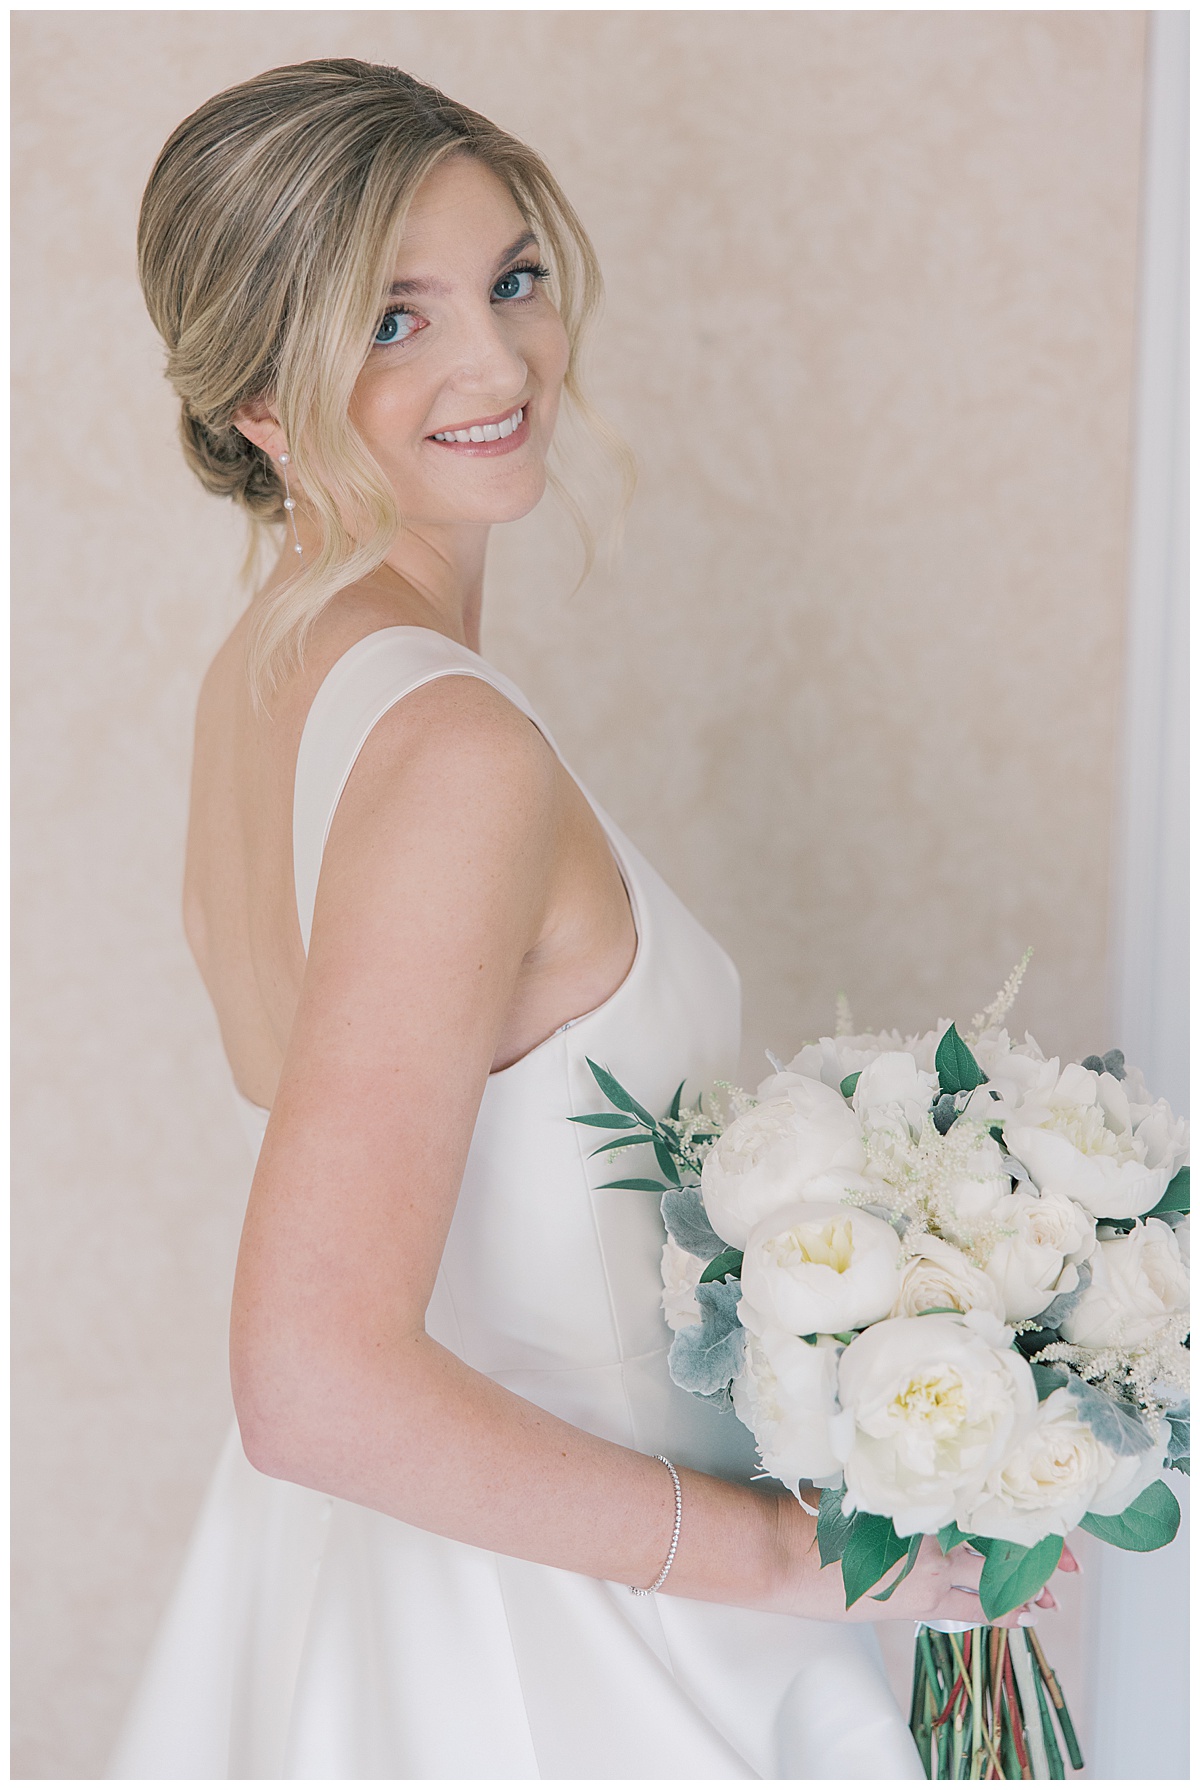 Bride with updo looking over shoulder with white peonies on wedding day.